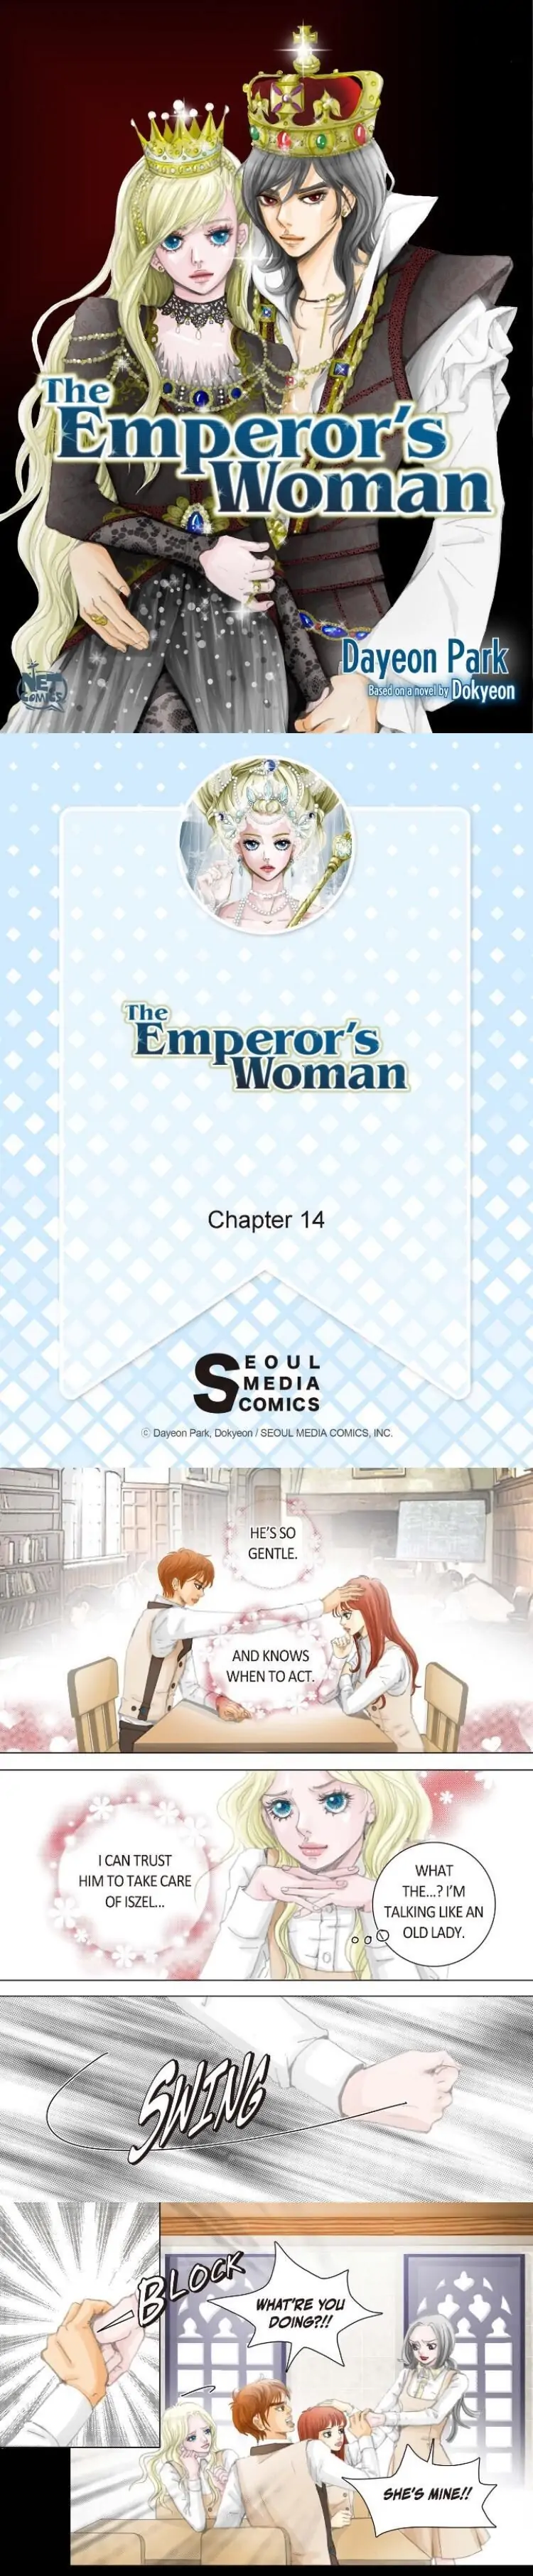 The Emperor’s Woman chapter 14